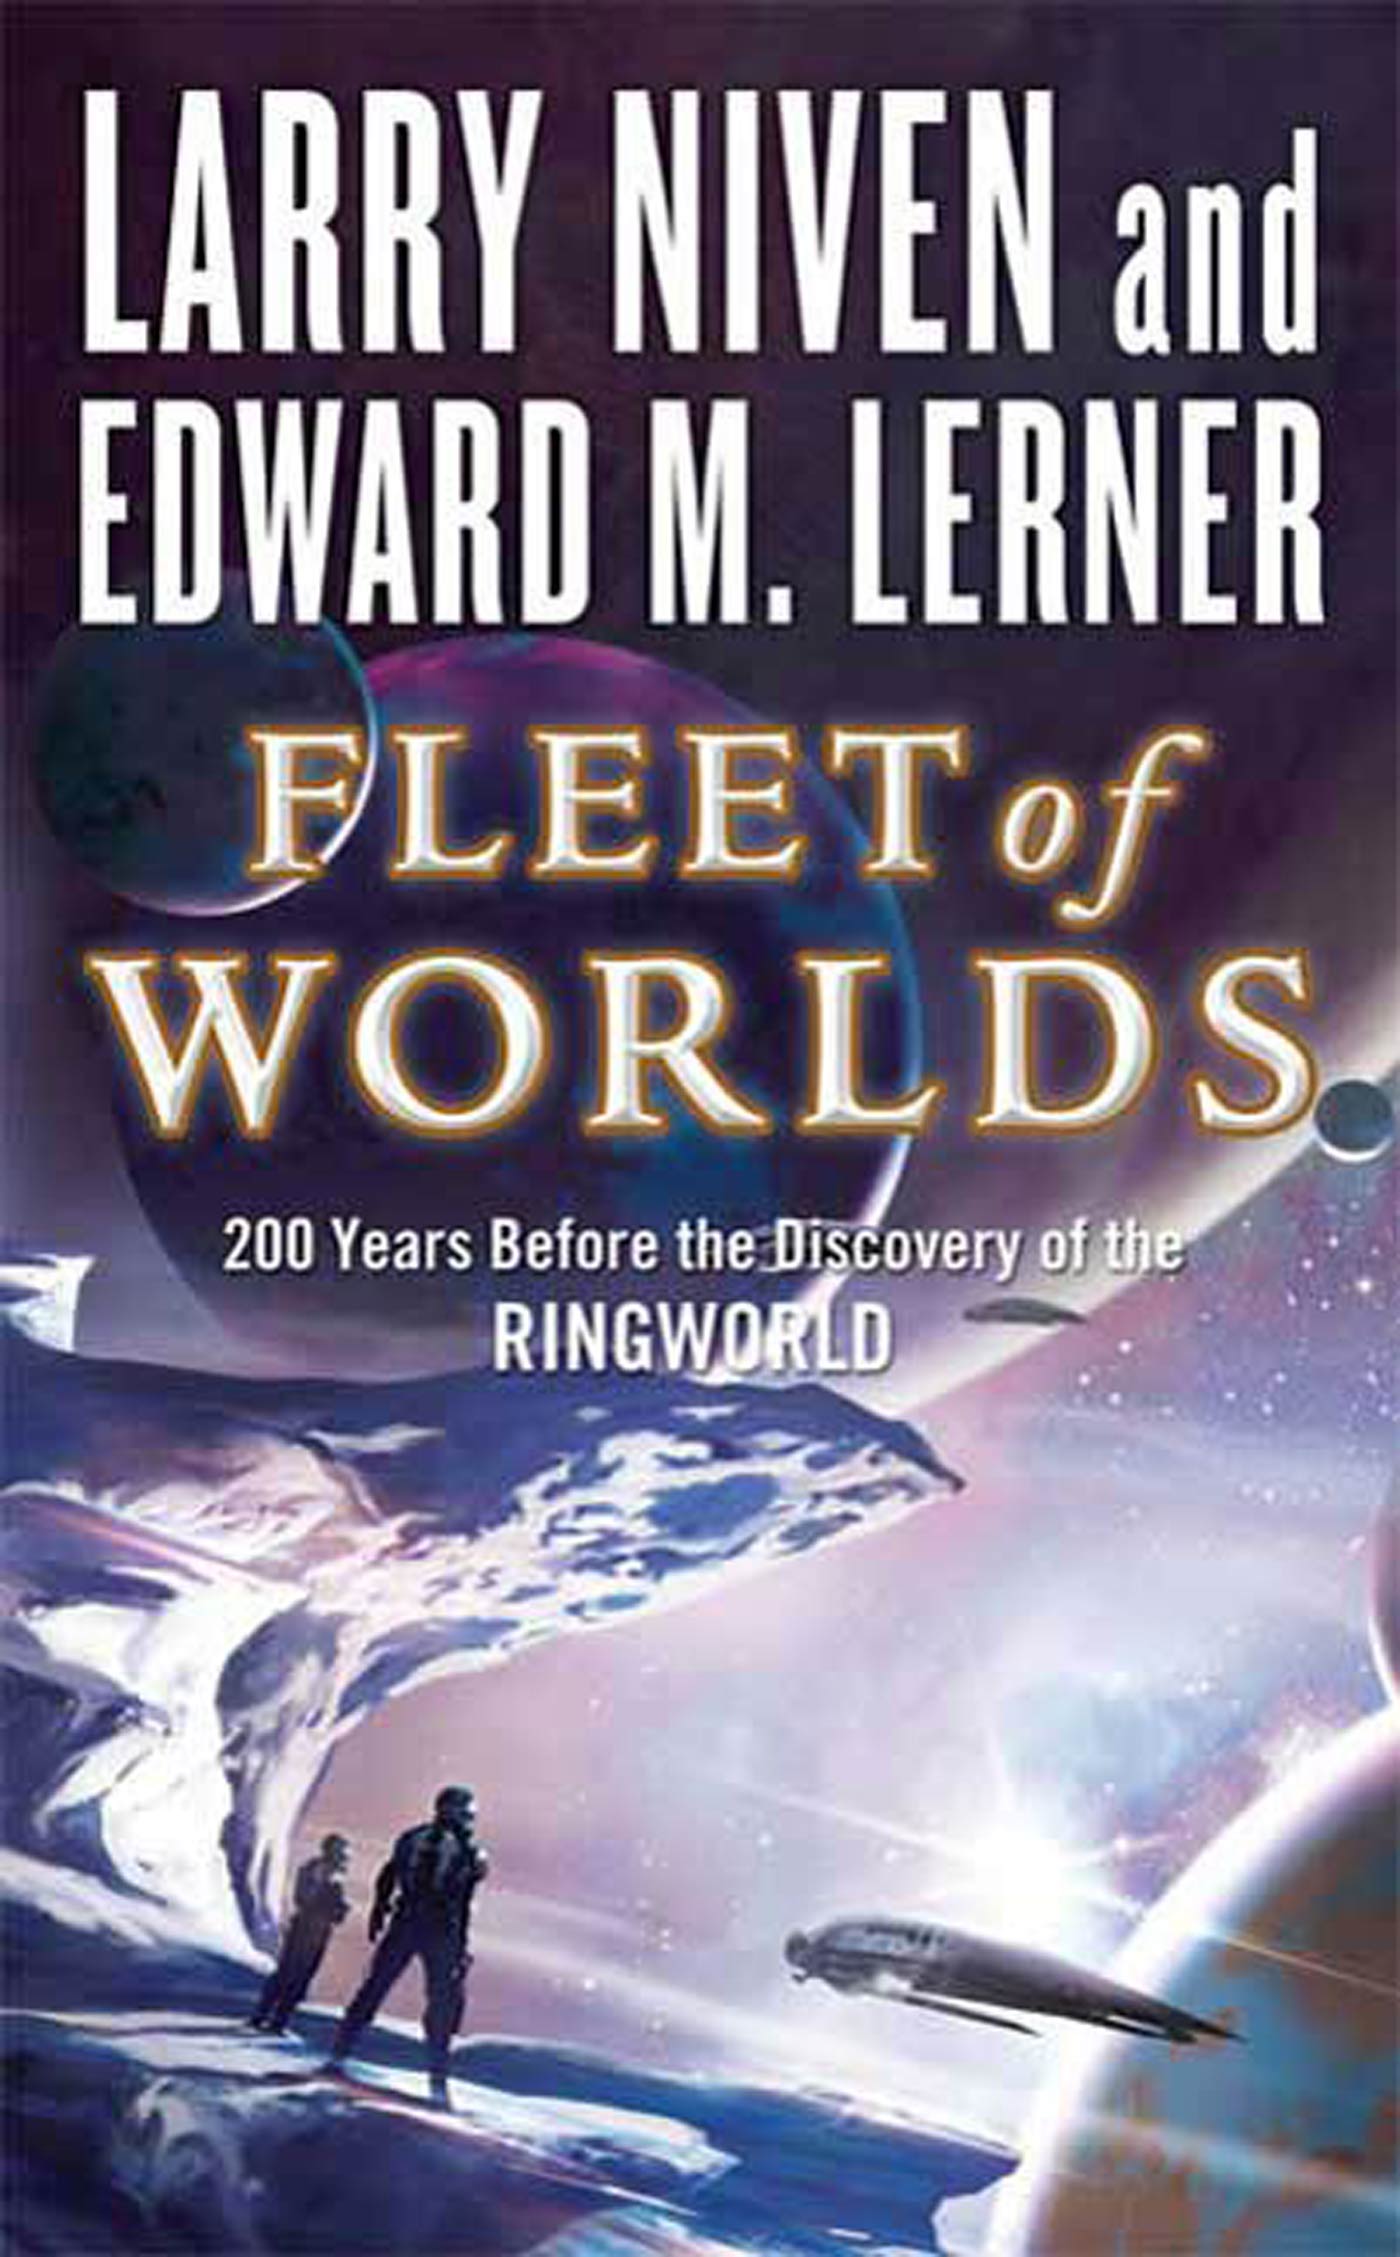 Fleet of Worlds : 200 Years Before the Discovery of the Ringworld by Larry Niven, Edward M. Lerner